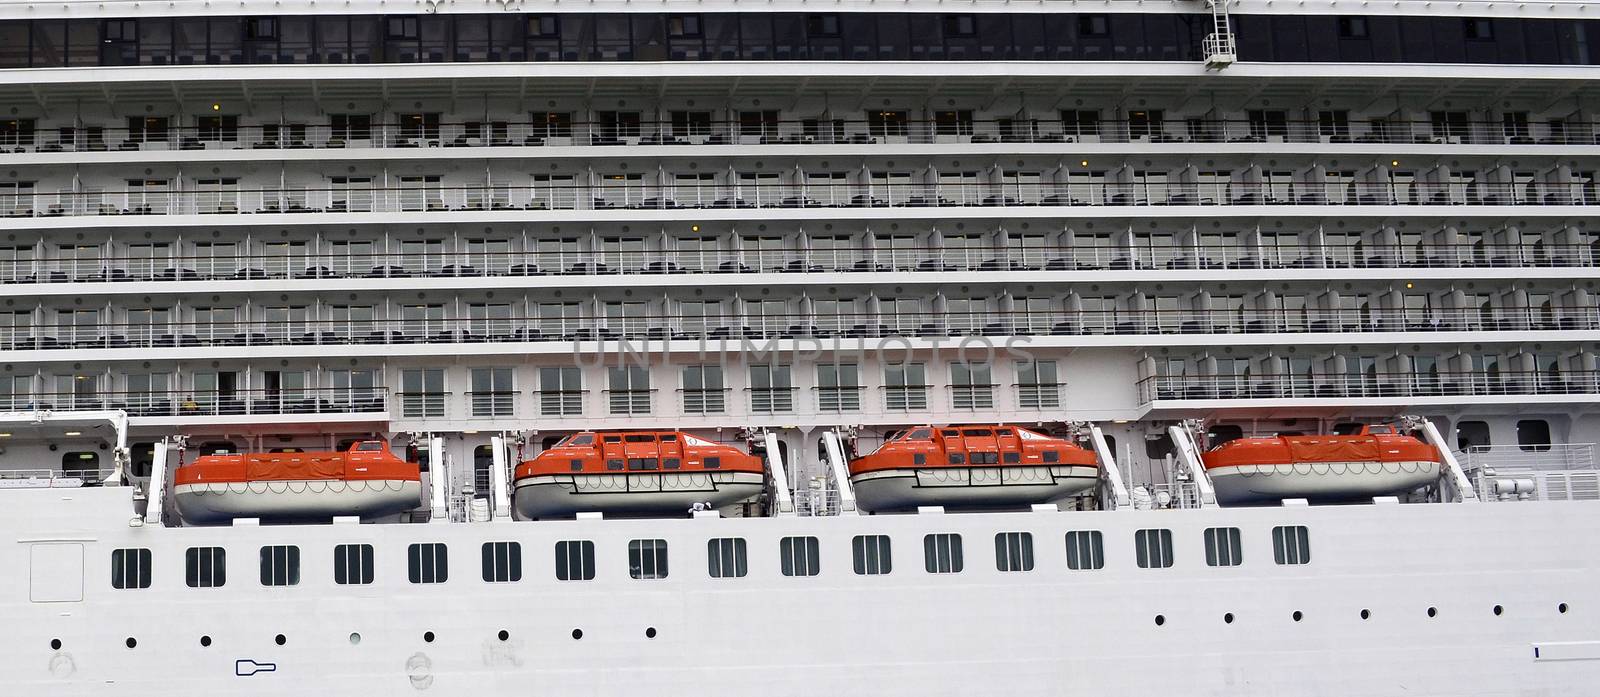 Side view of a cruise ship with lifeboats and cabins balcony